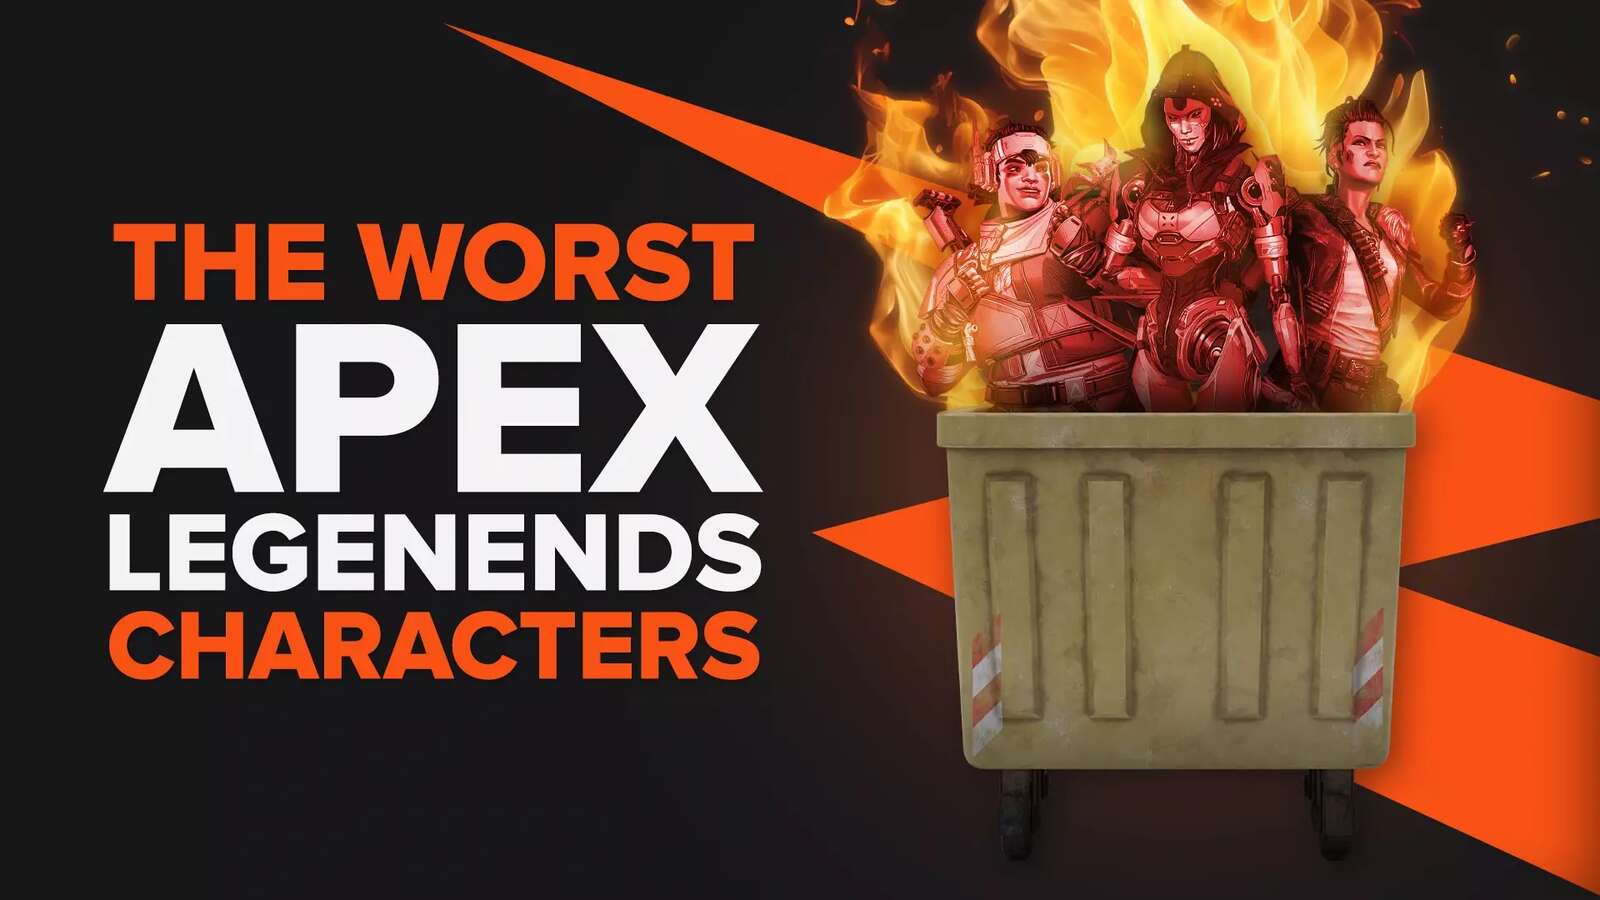 5 Worst Apex Legends Characters Ranked [Avoid These]